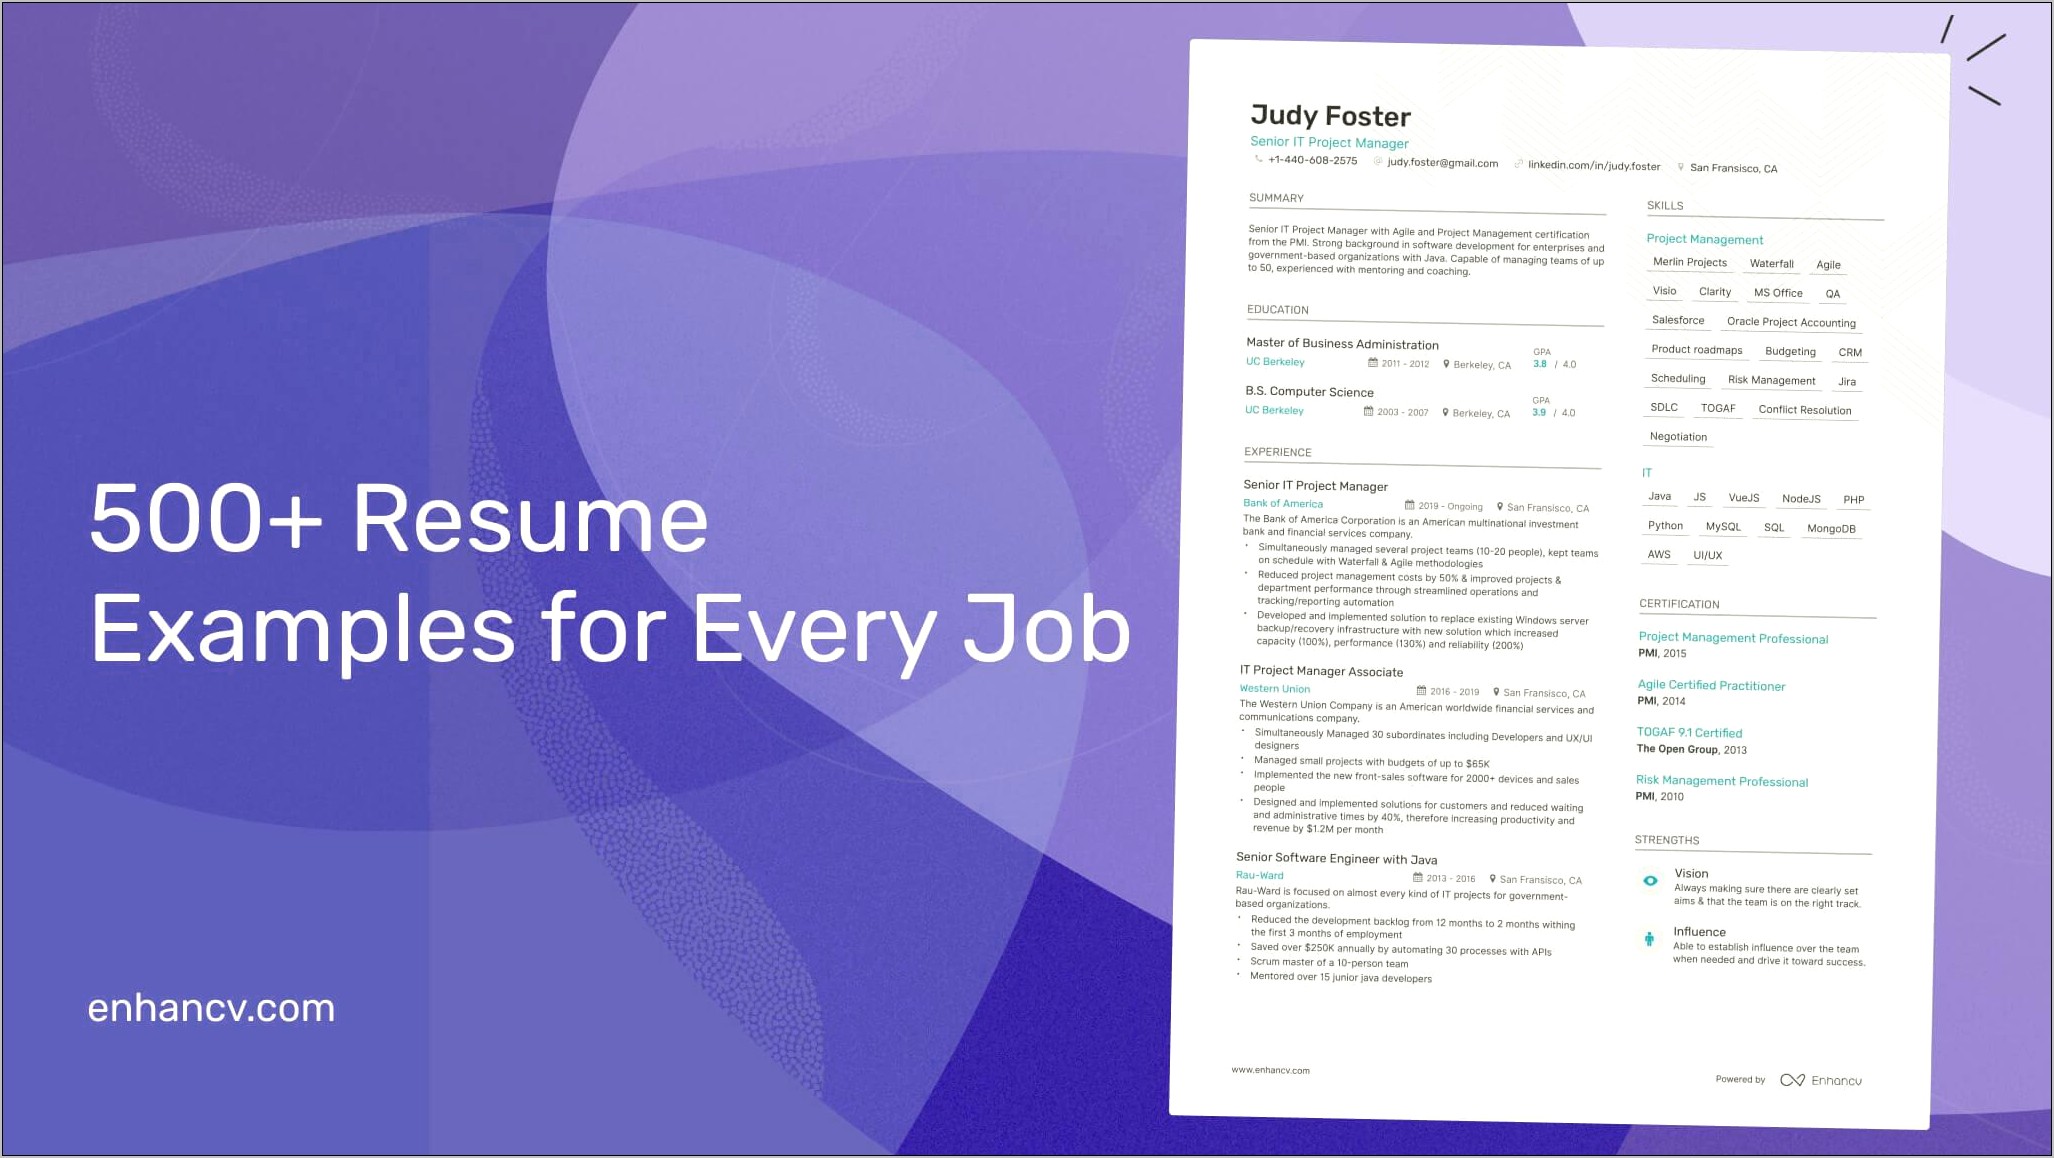 Resume Objective Examples Beauty Industry